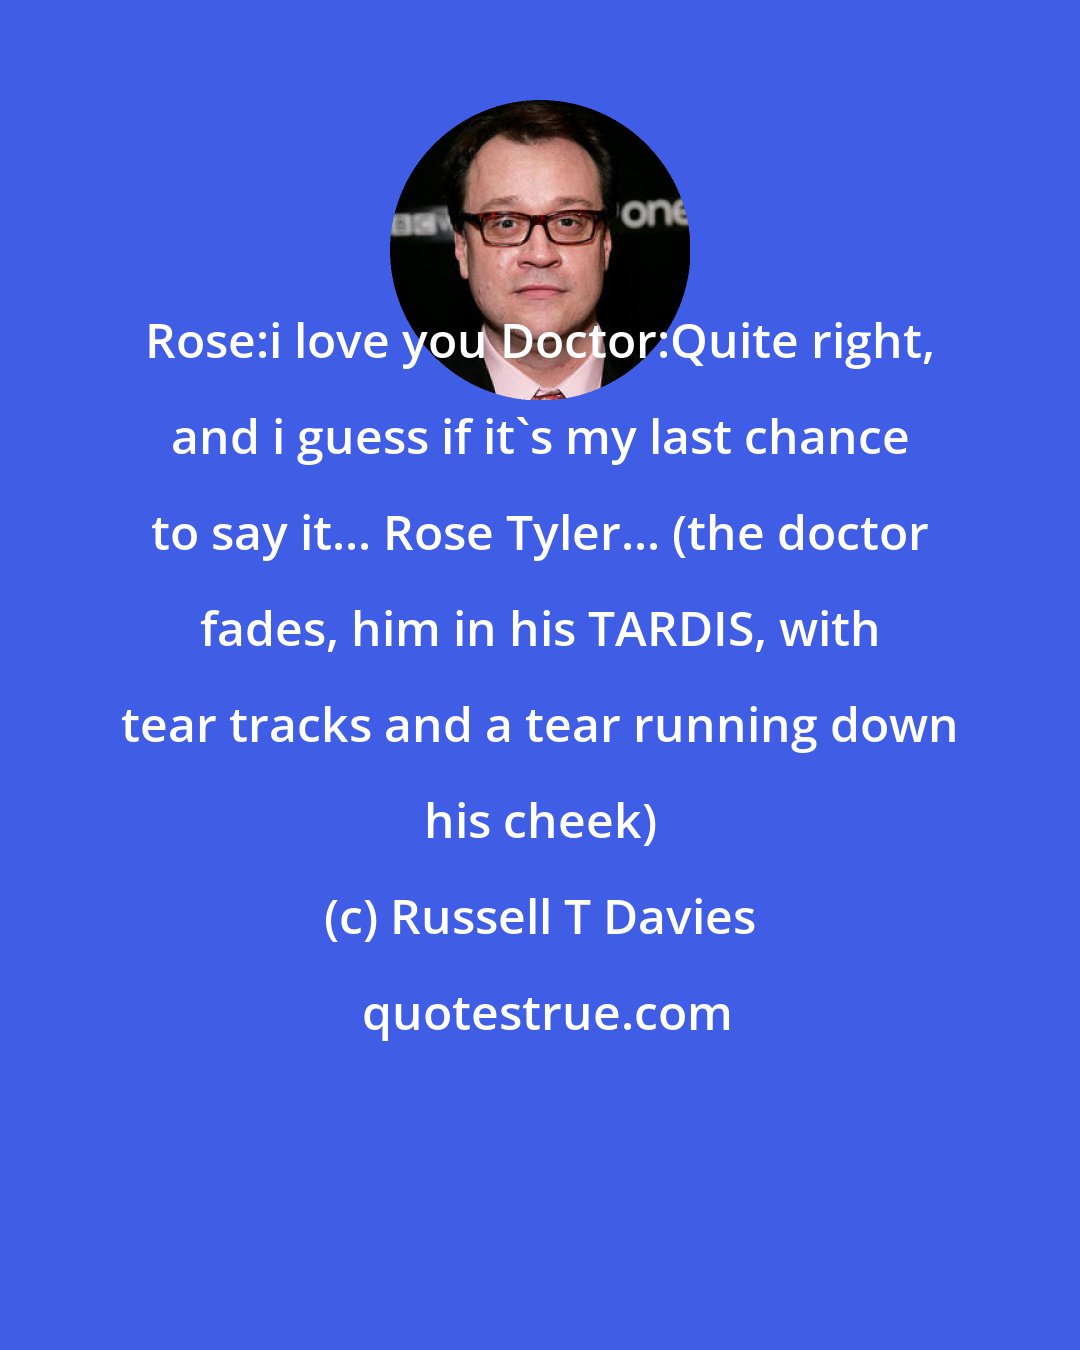 Russell T Davies: Rose:i love you Doctor:Quite right, and i guess if it's my last chance to say it... Rose Tyler... (the doctor fades, him in his TARDIS, with tear tracks and a tear running down his cheek)